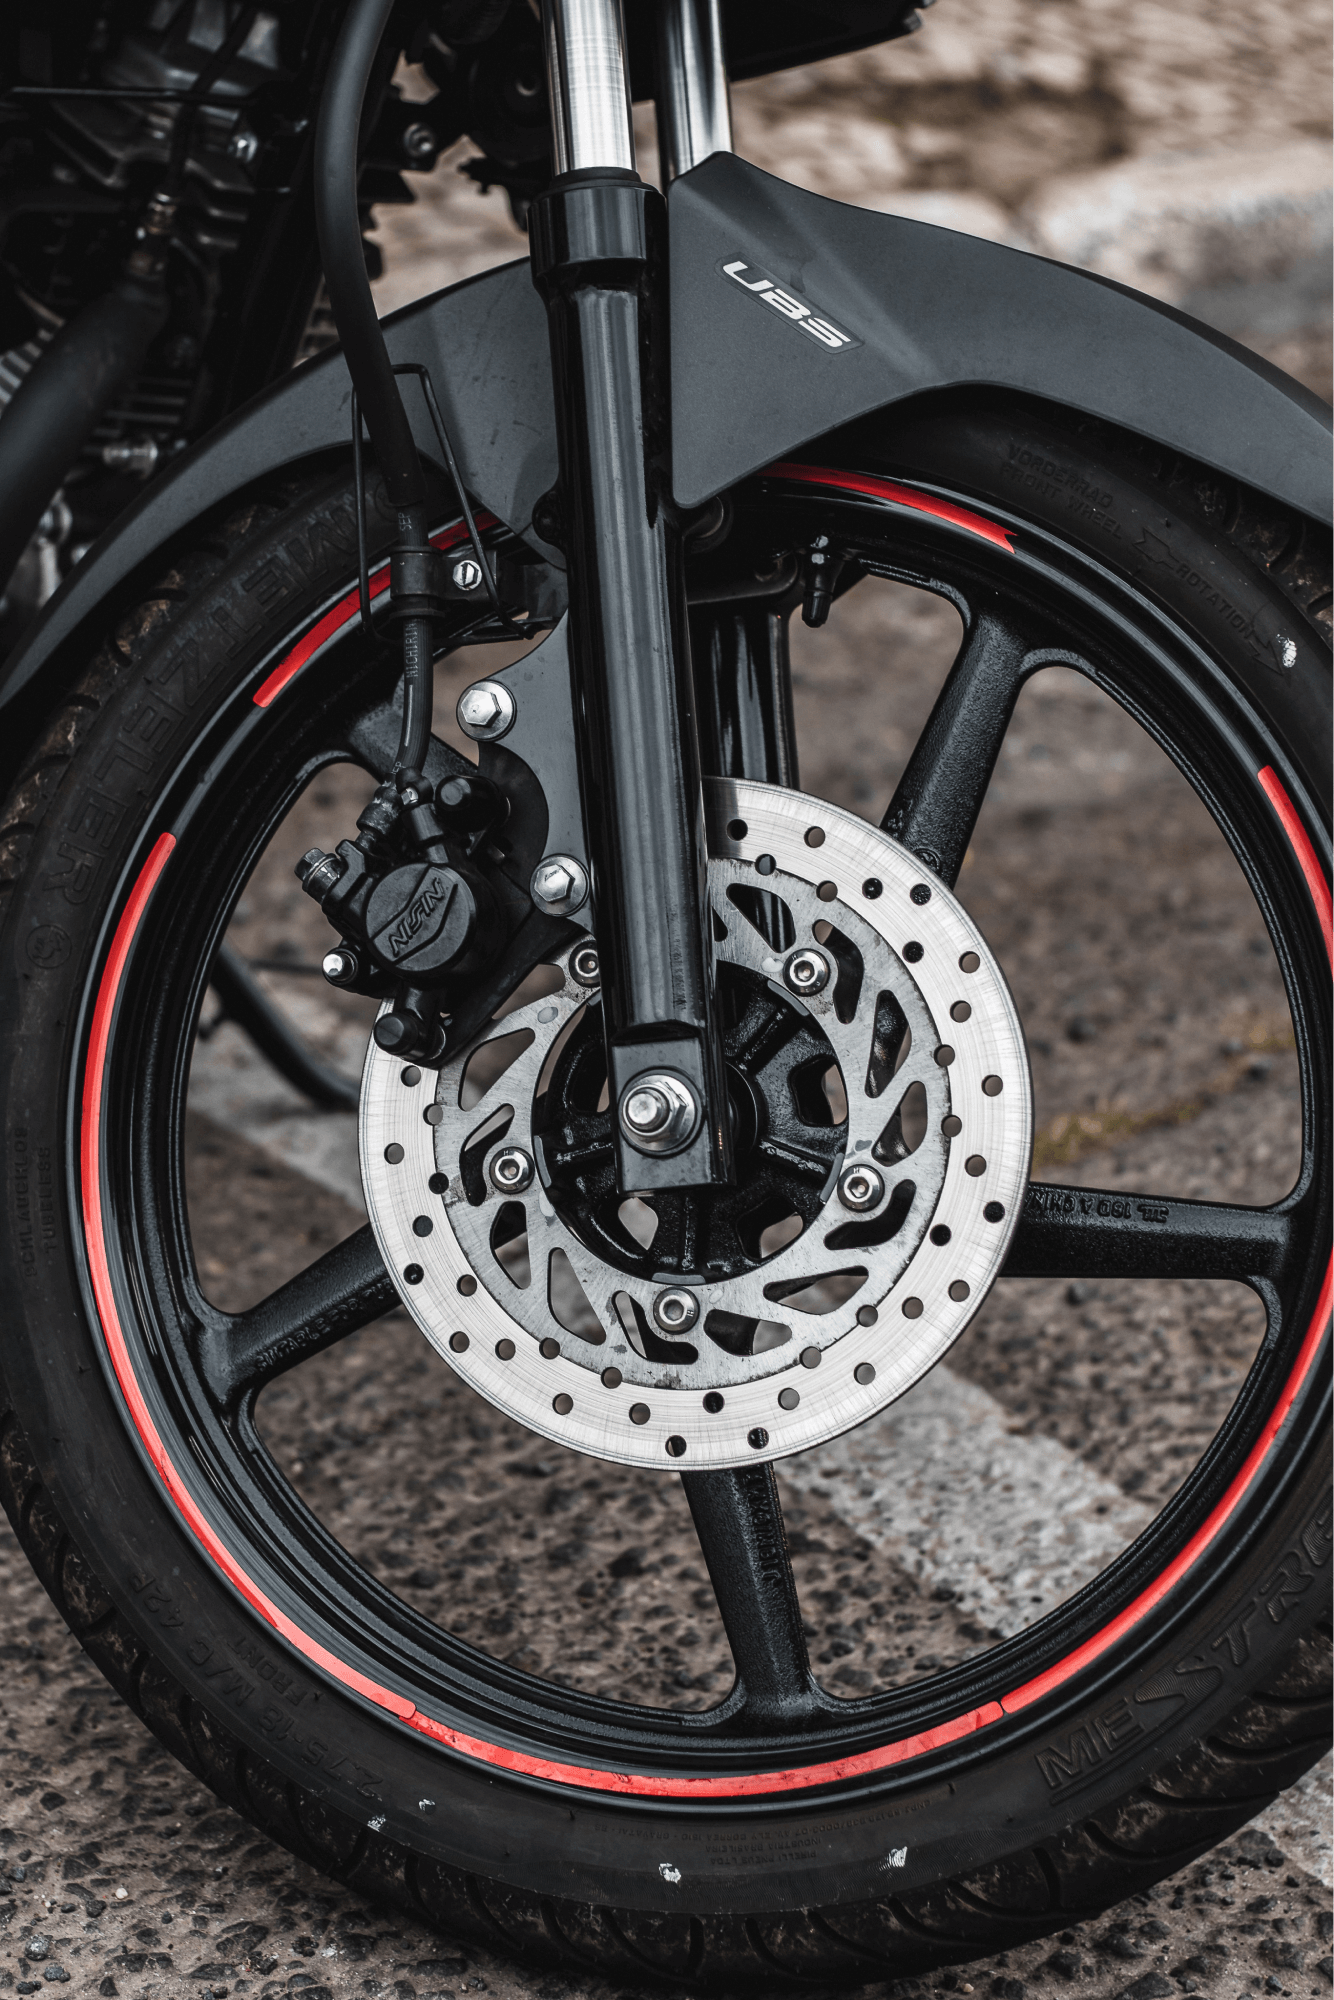 The Ultimate Brake Pad Buyers Guide